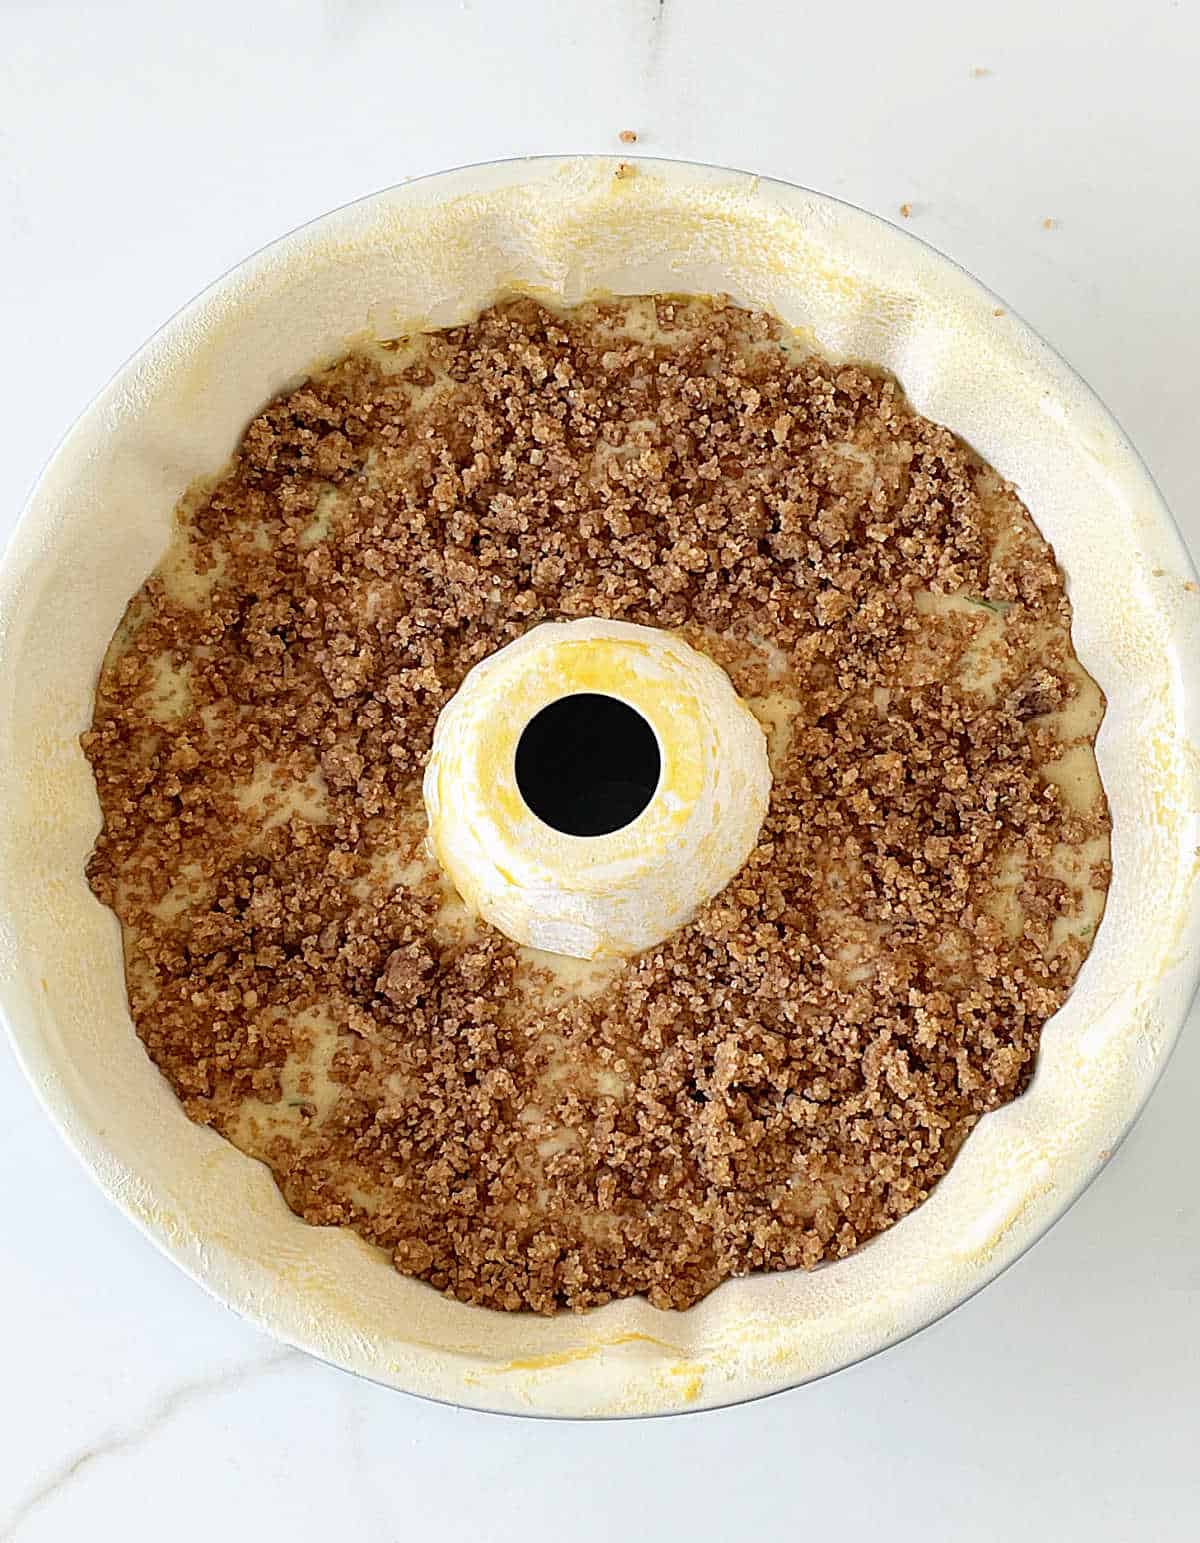 Overview of bundt cake pan with crumble on top on white surface.